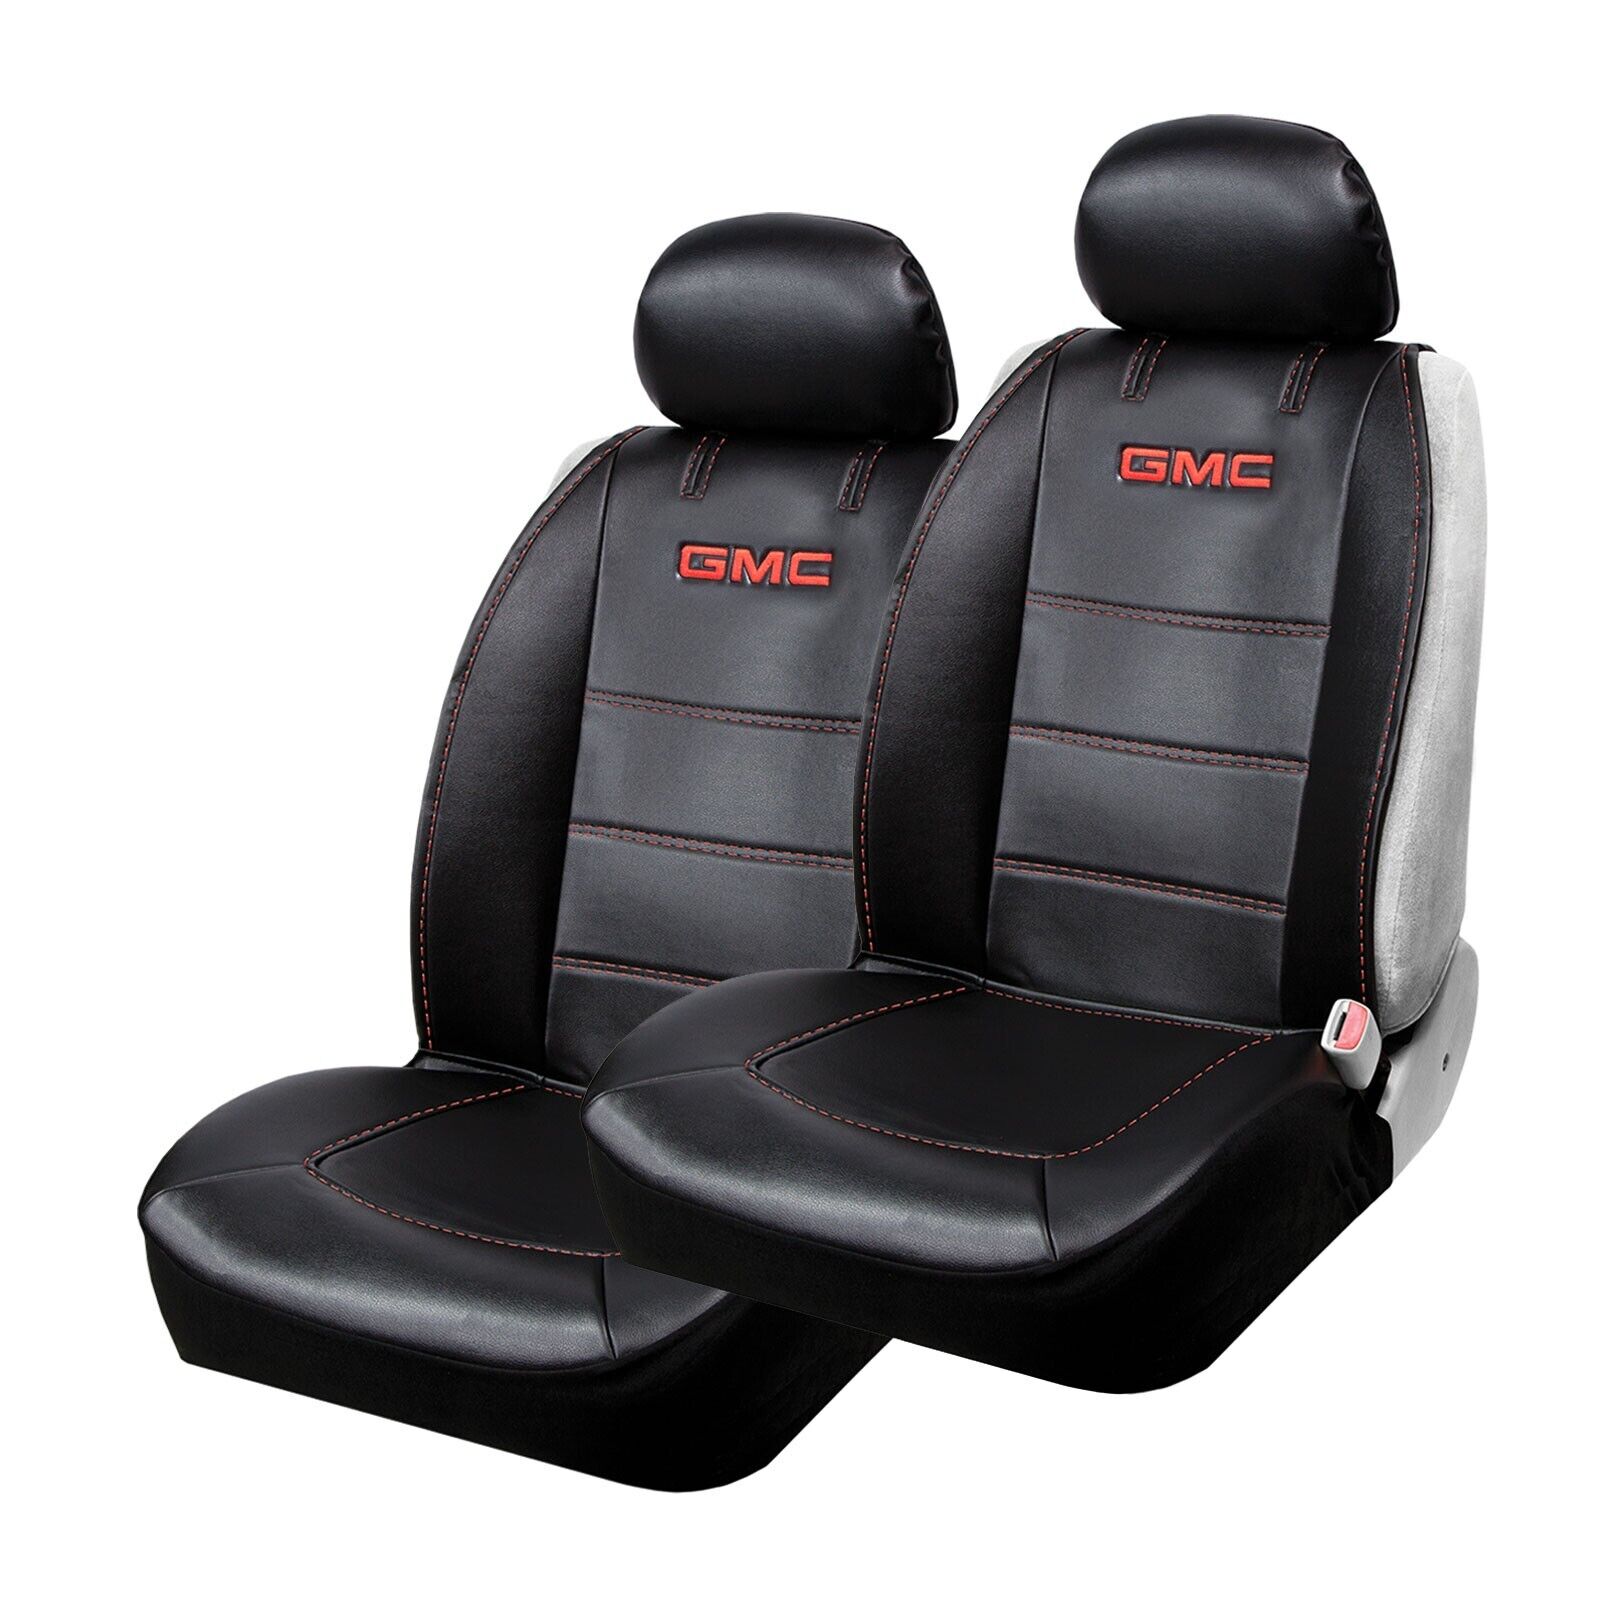 New GMC Elite Synthetic Leather Car Truck Suv 2 Front Sideless Seat Covers Set